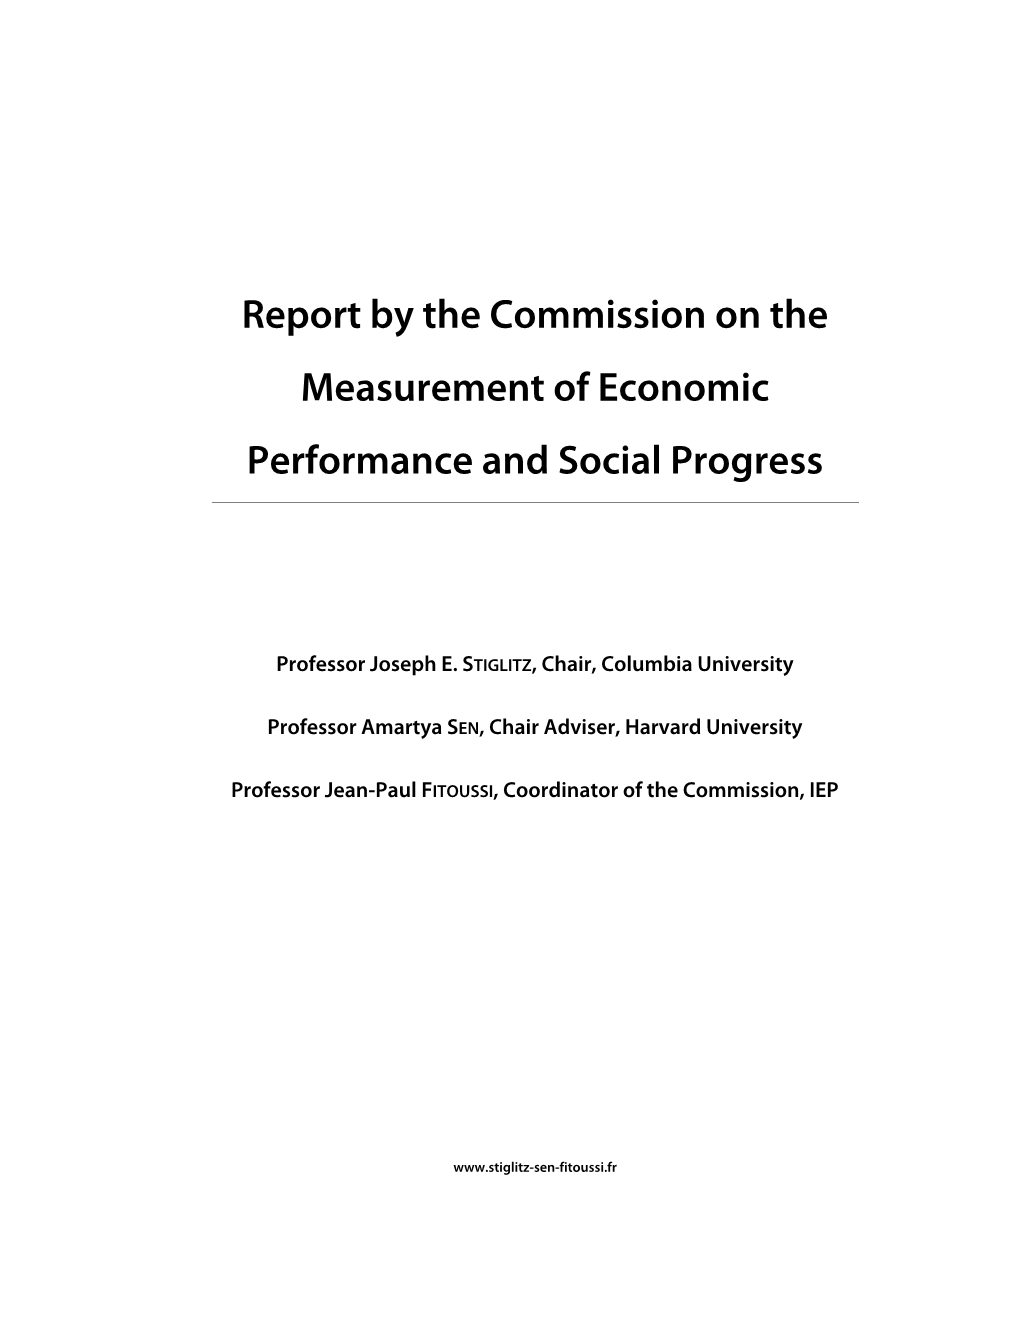 Report by the Commission on the Measurement of Economic Performance and Social Progress